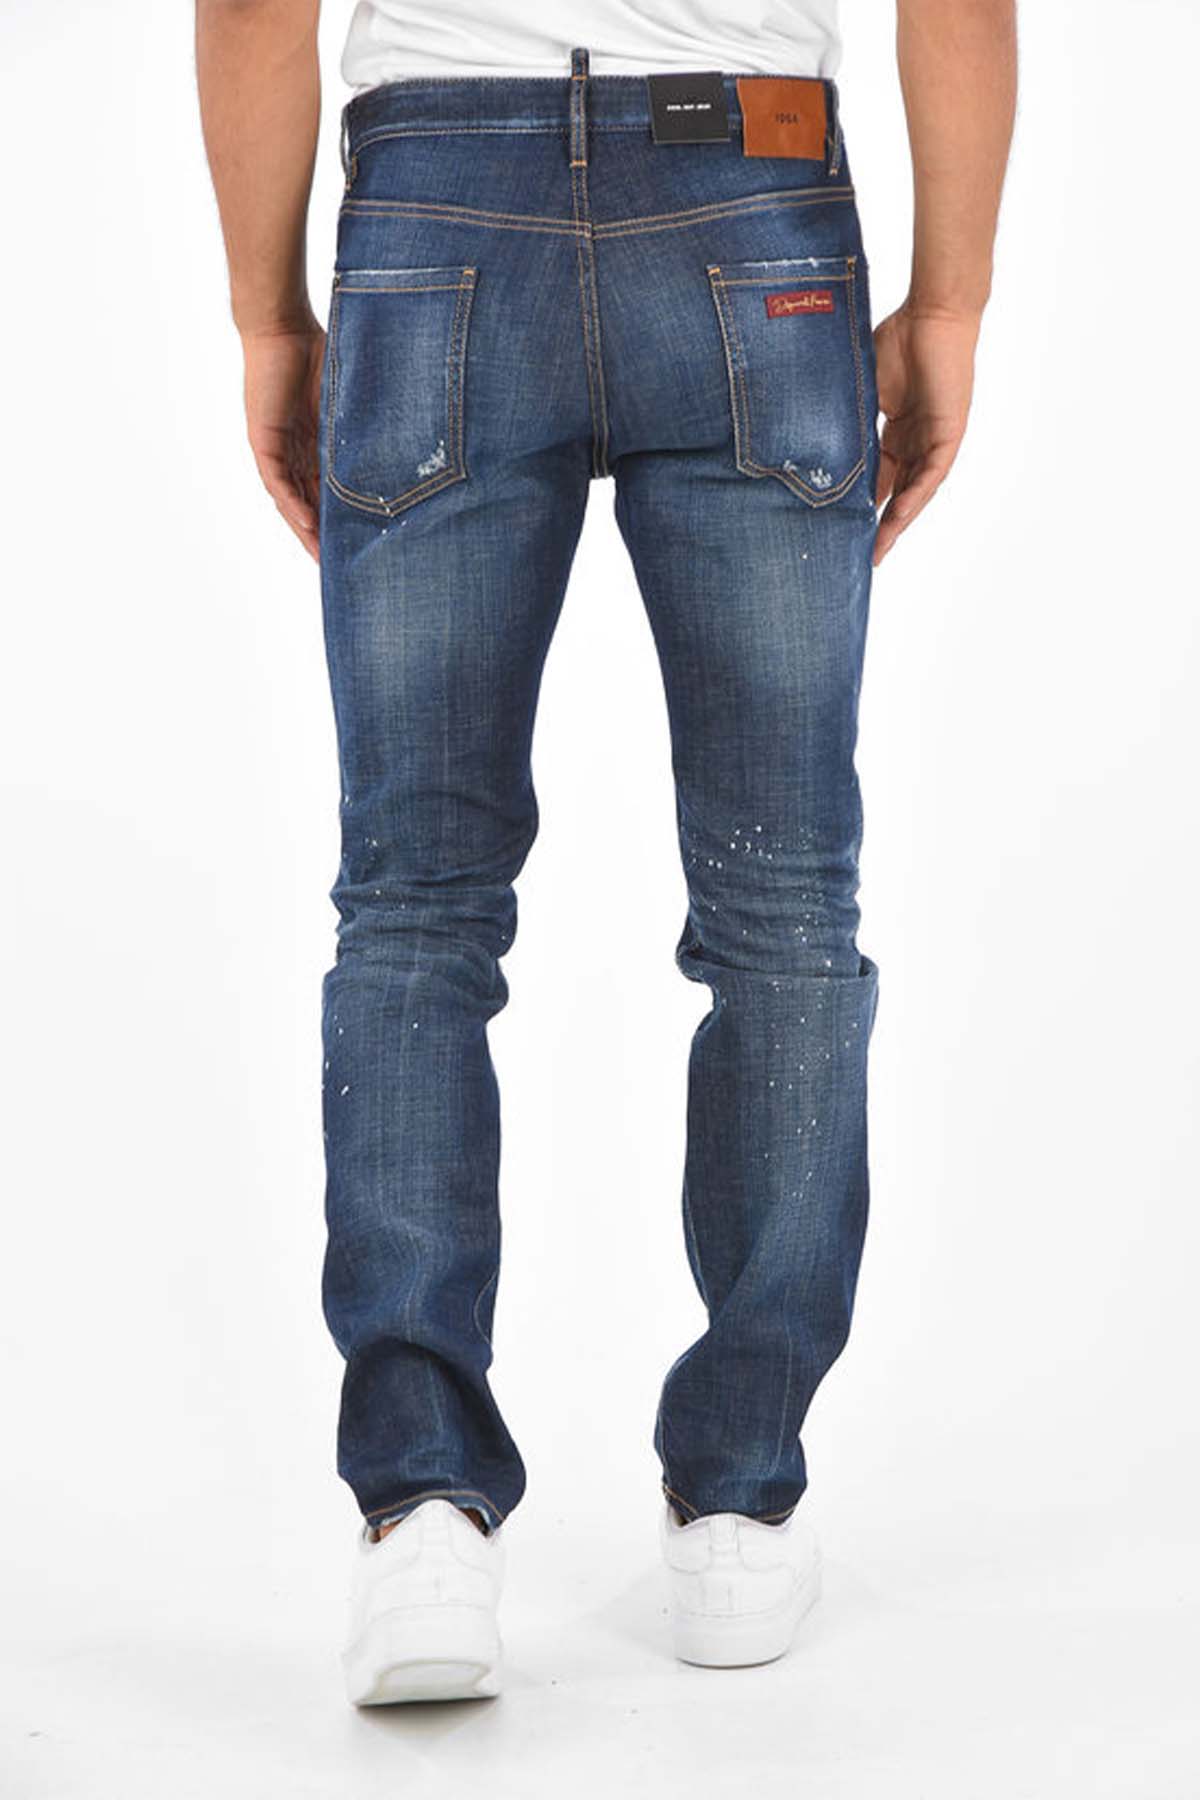 WASHED-OUT COOL GUY JEANS 18 CM